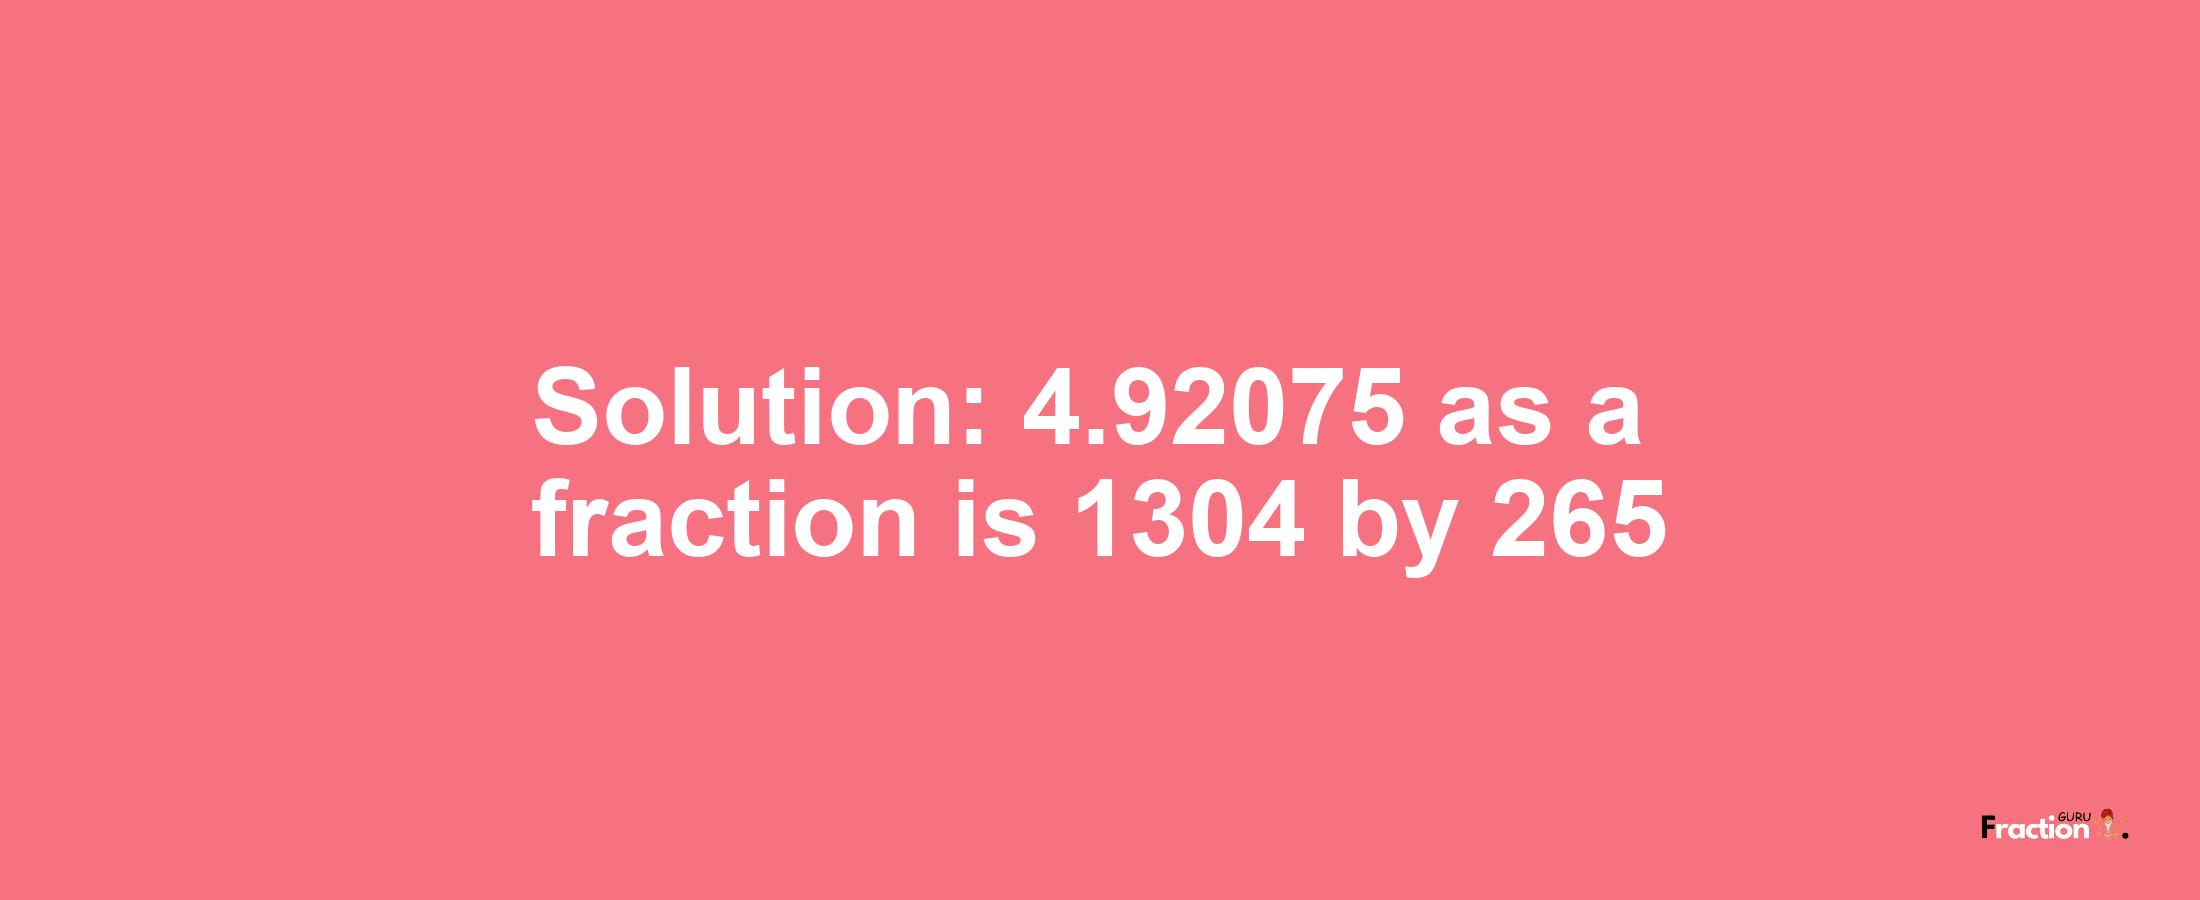 Solution:4.92075 as a fraction is 1304/265